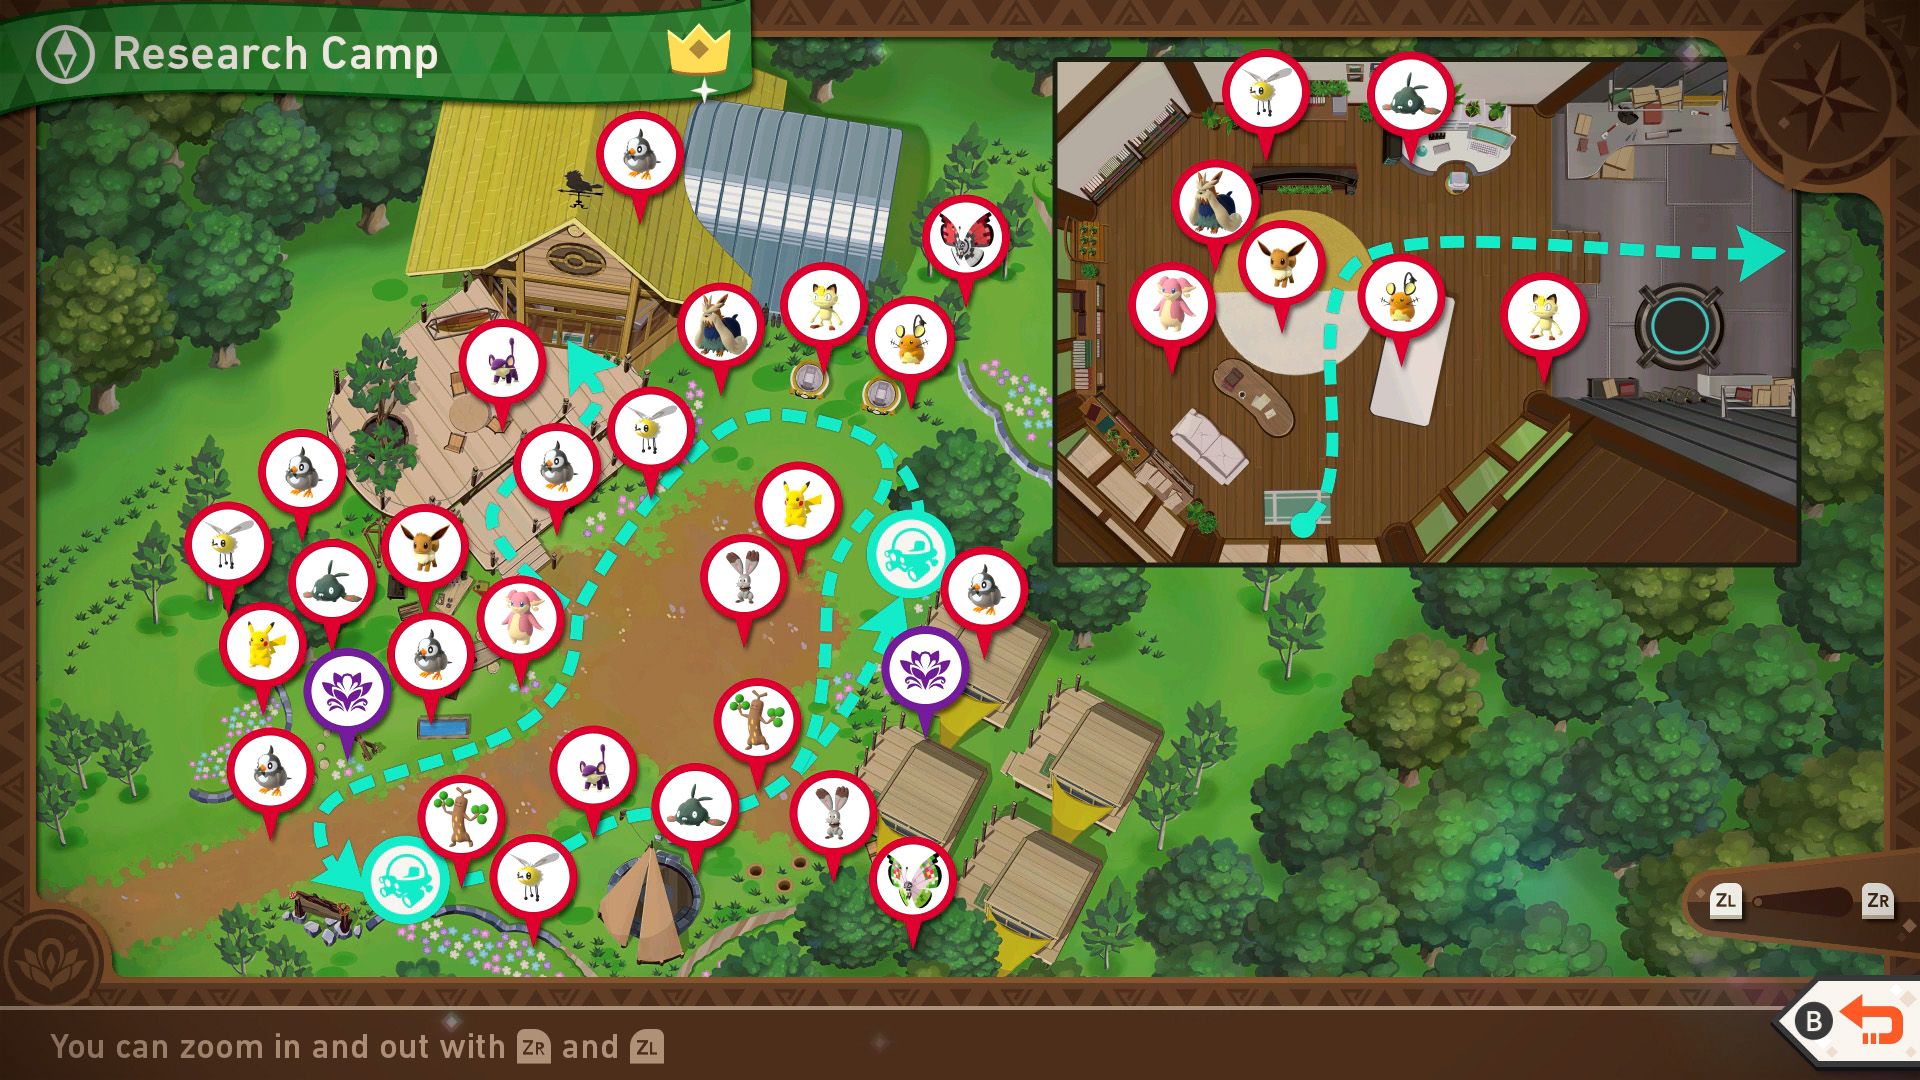 A complete map of the Research Camp course in New Pokemon Snap